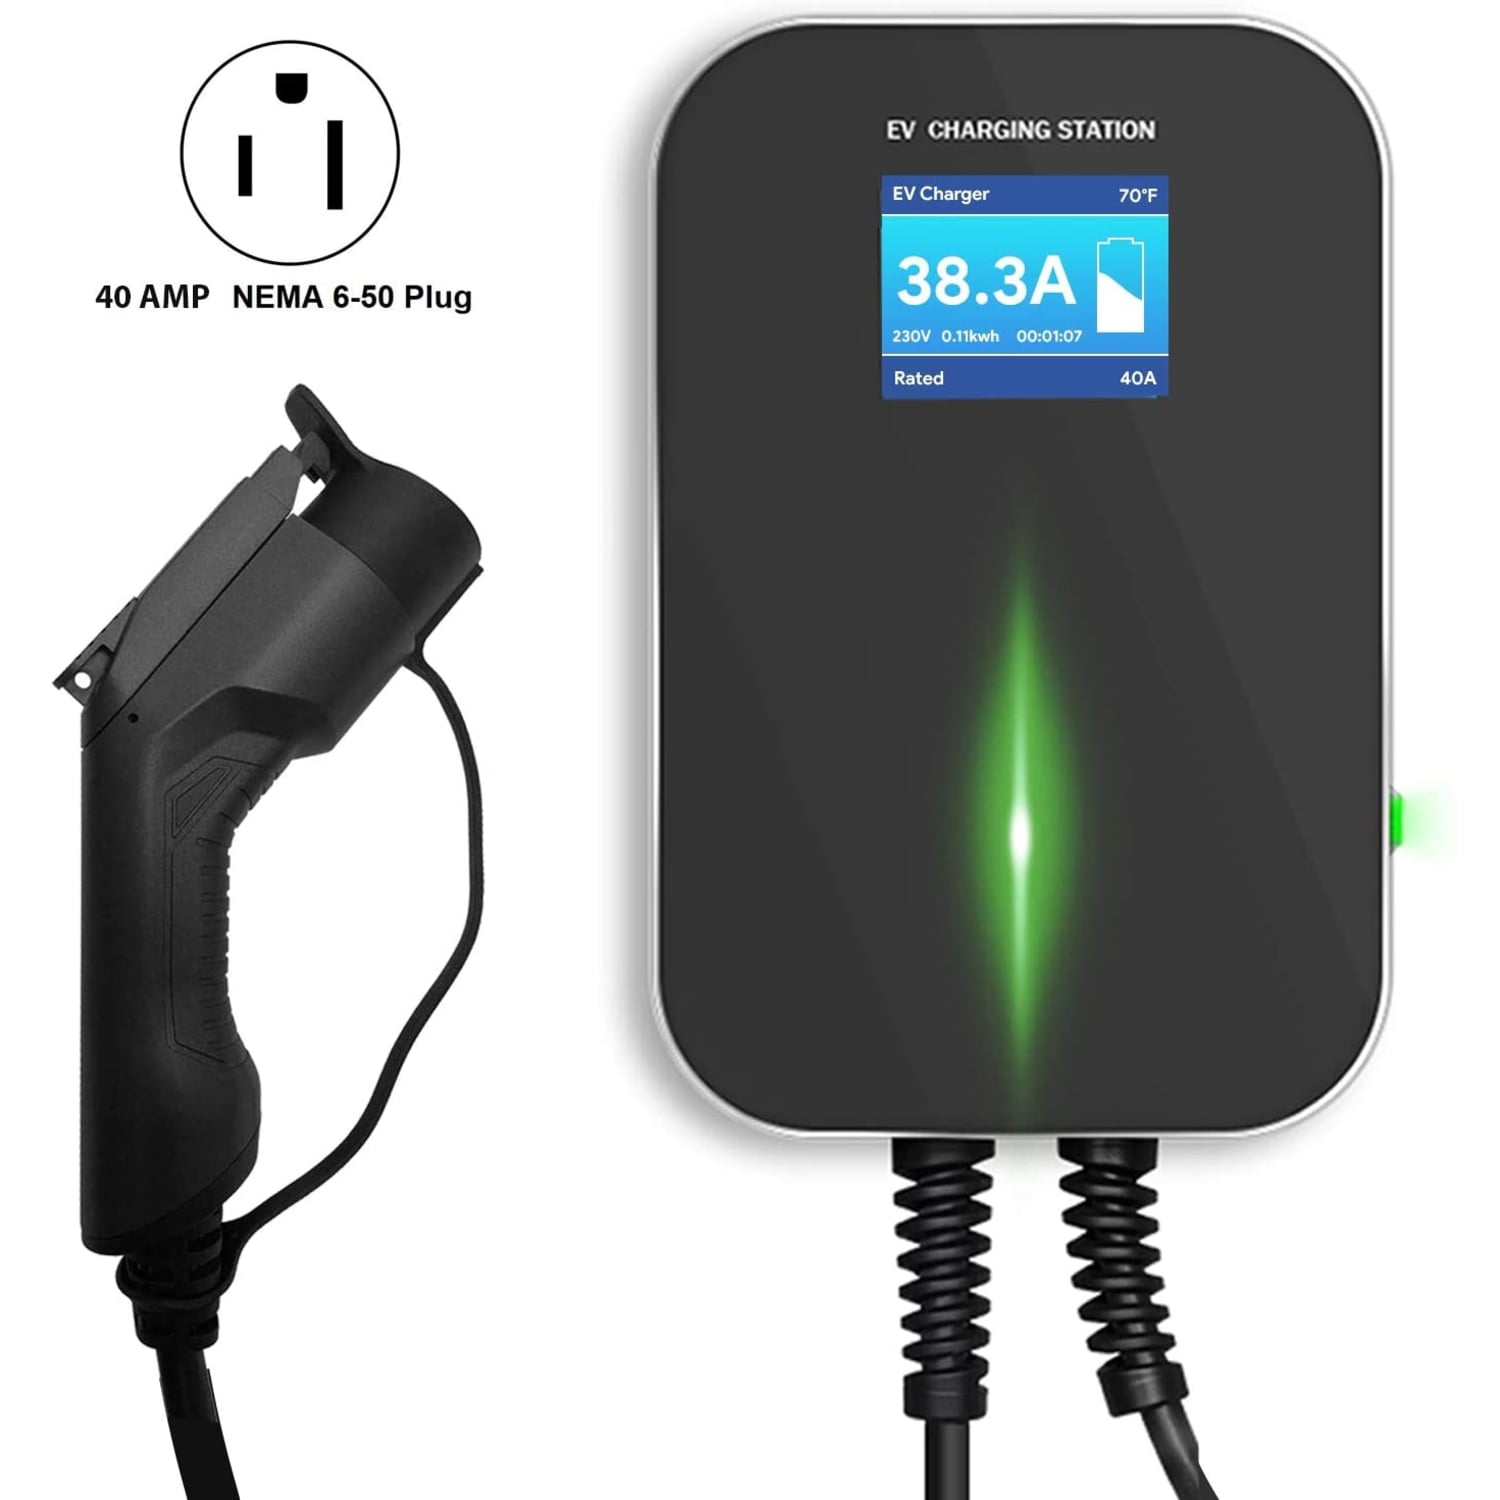 lectron-240v-40-amp-level-2-electric-vehicle-ev-charging-station-with